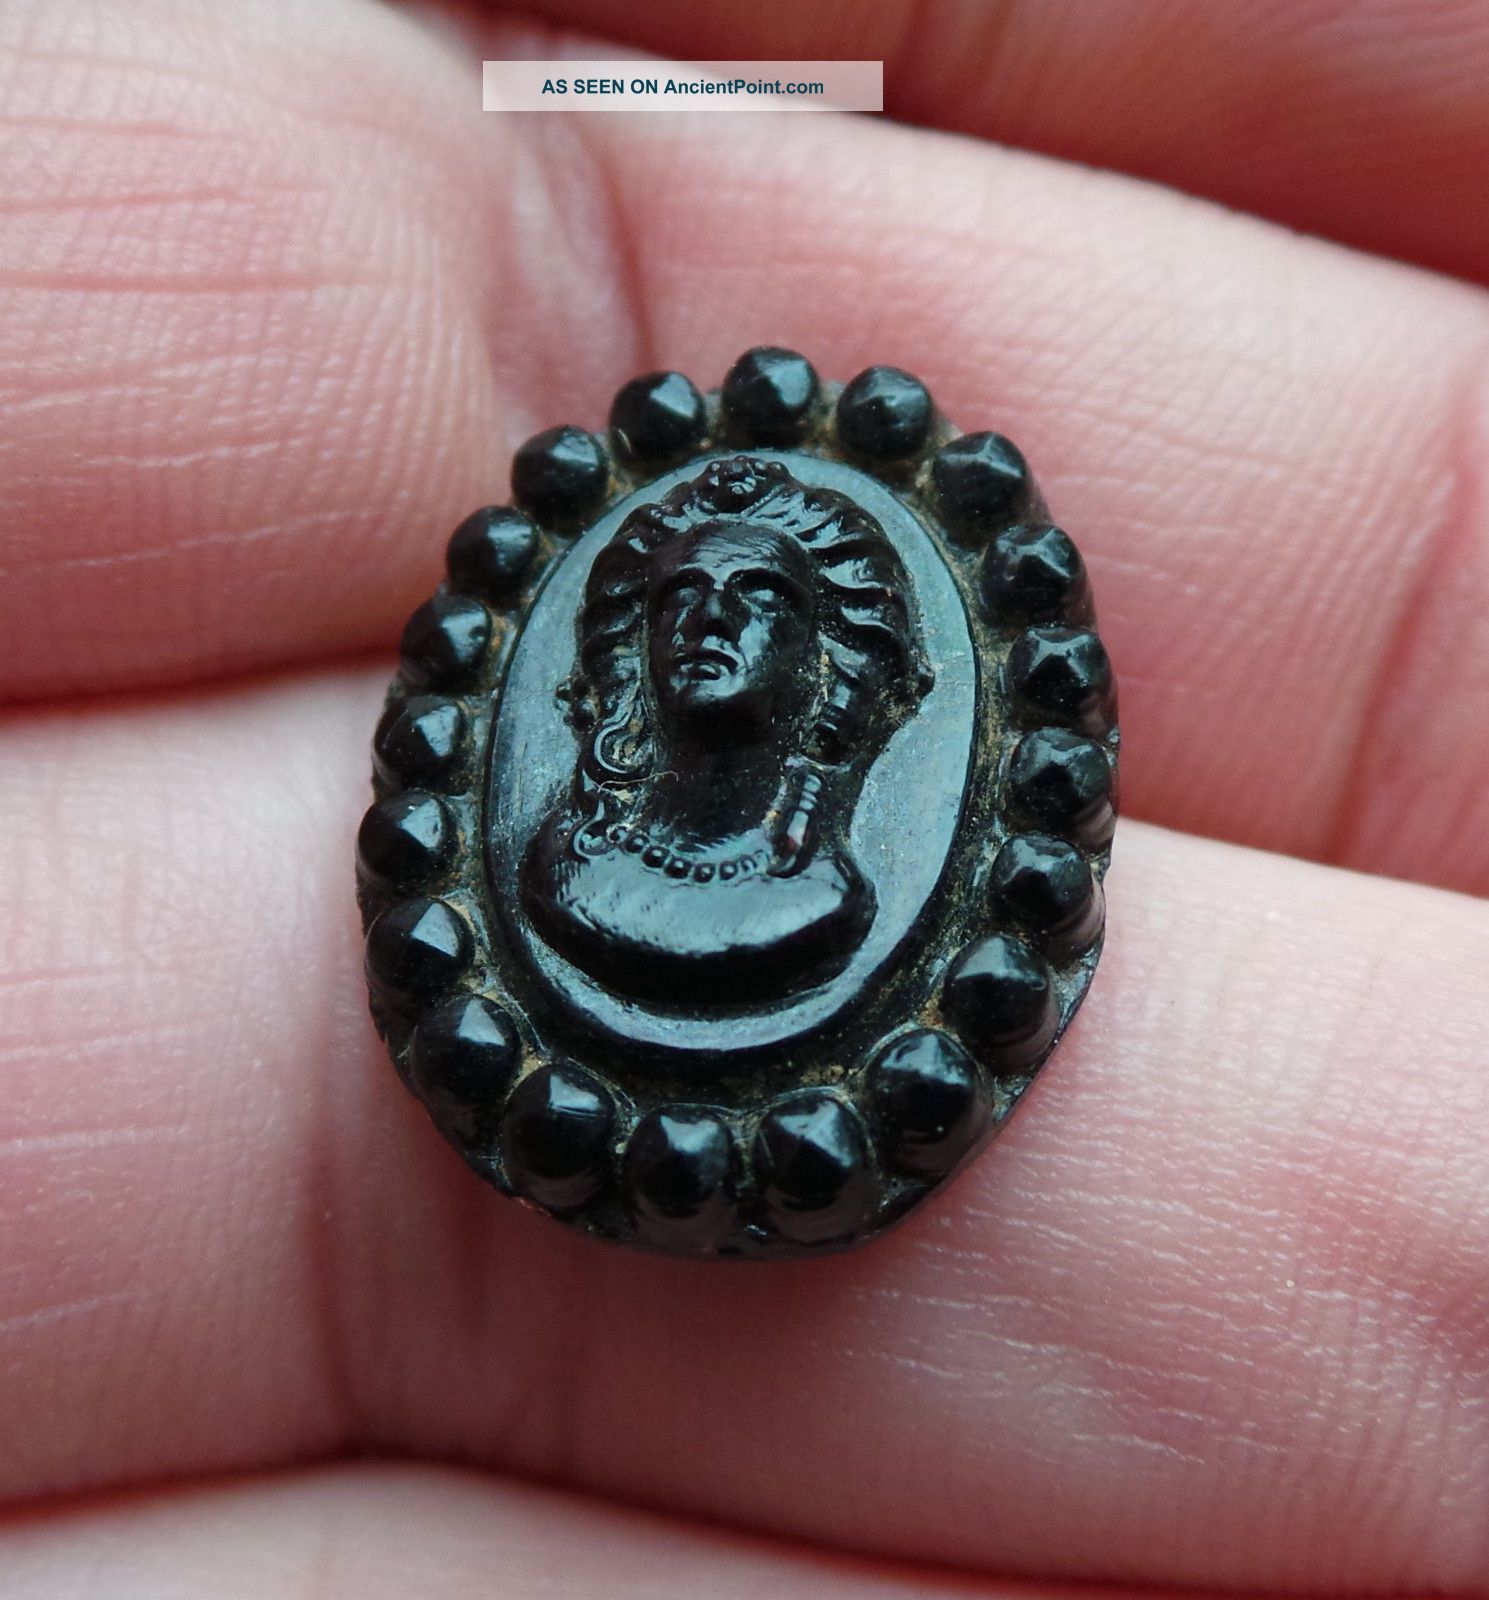 A Roman Or Victorian Cameo With Image Of A Lady - Metal Detecor Find. Other Antiquities photo